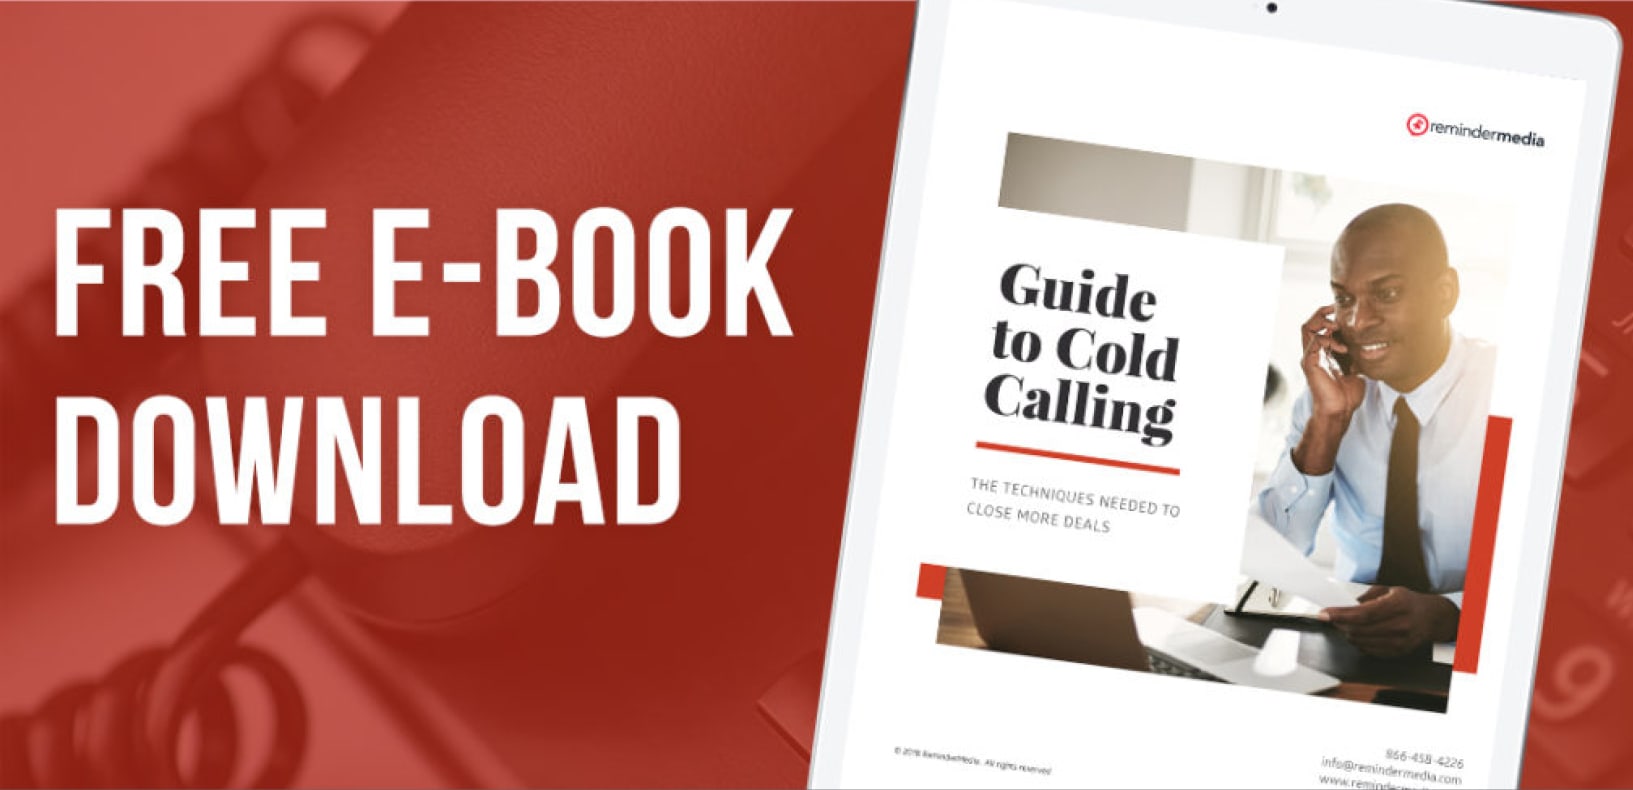 Ad insert. Free ebook download. Guide to Cold Calling.